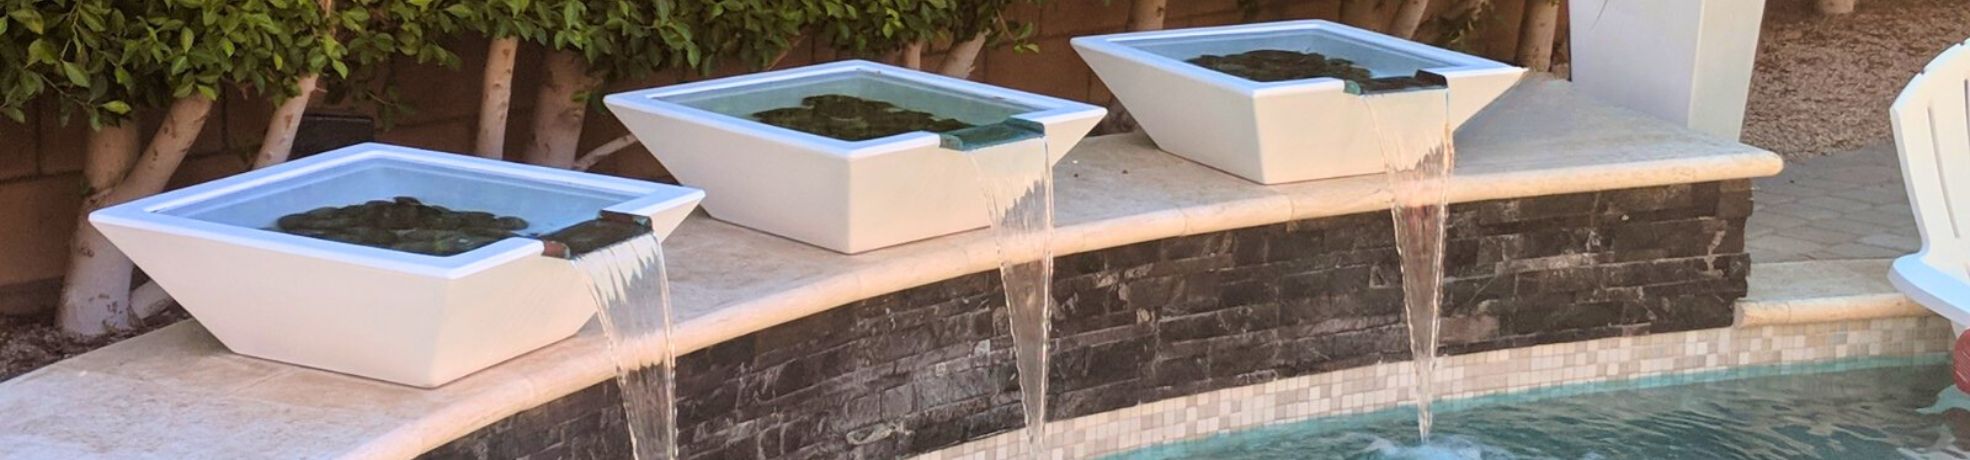 Water Bowls for the Pool